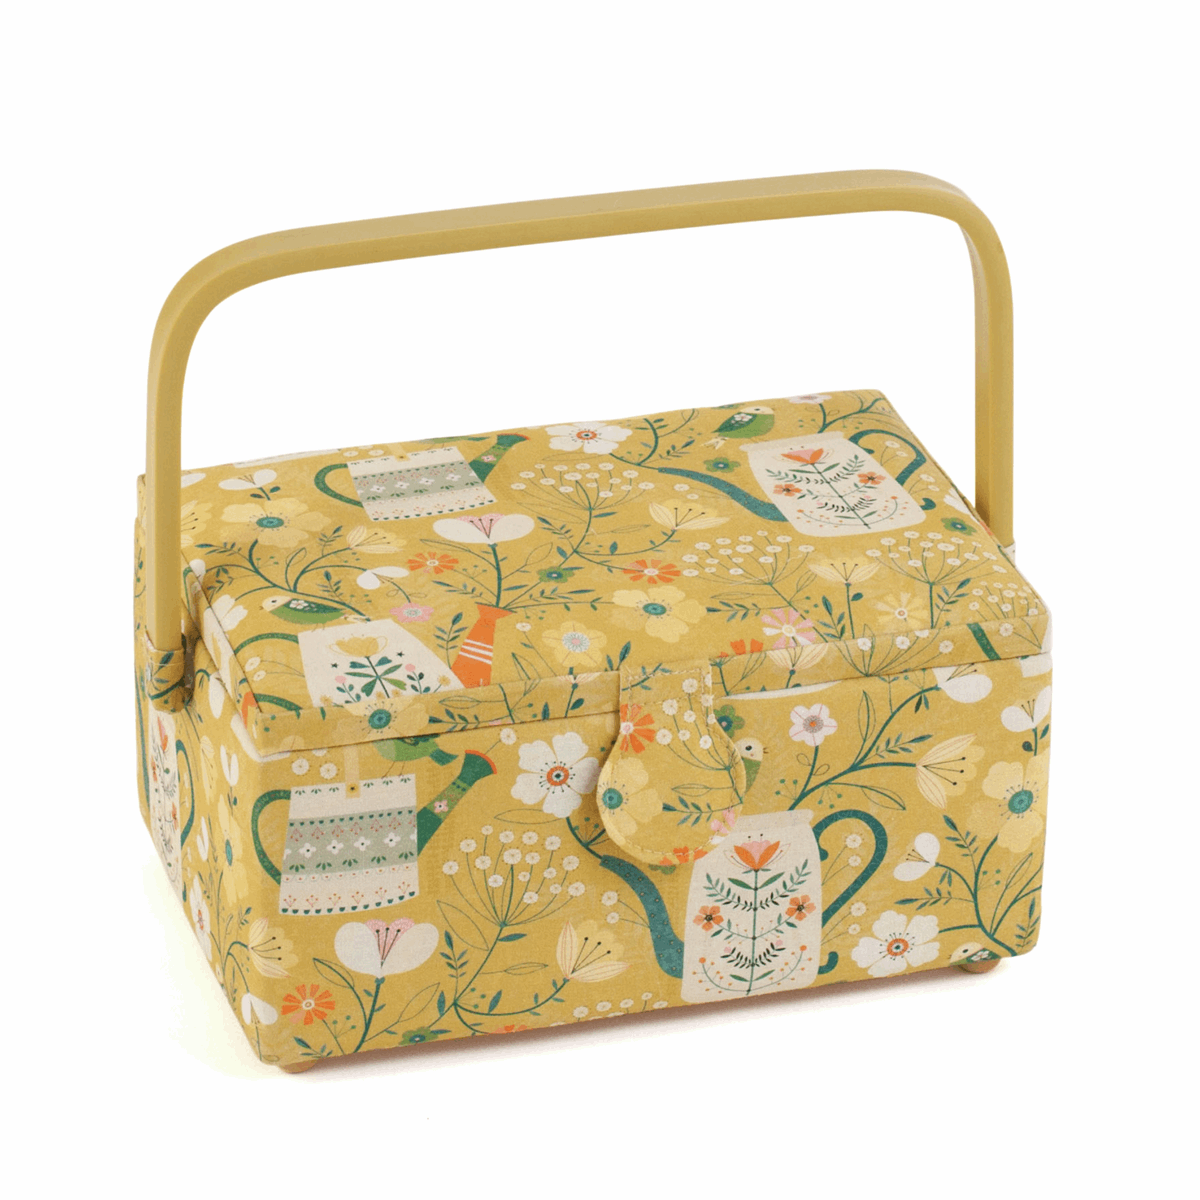 Hedgerow Sewing Box with PVC Handle - Medium